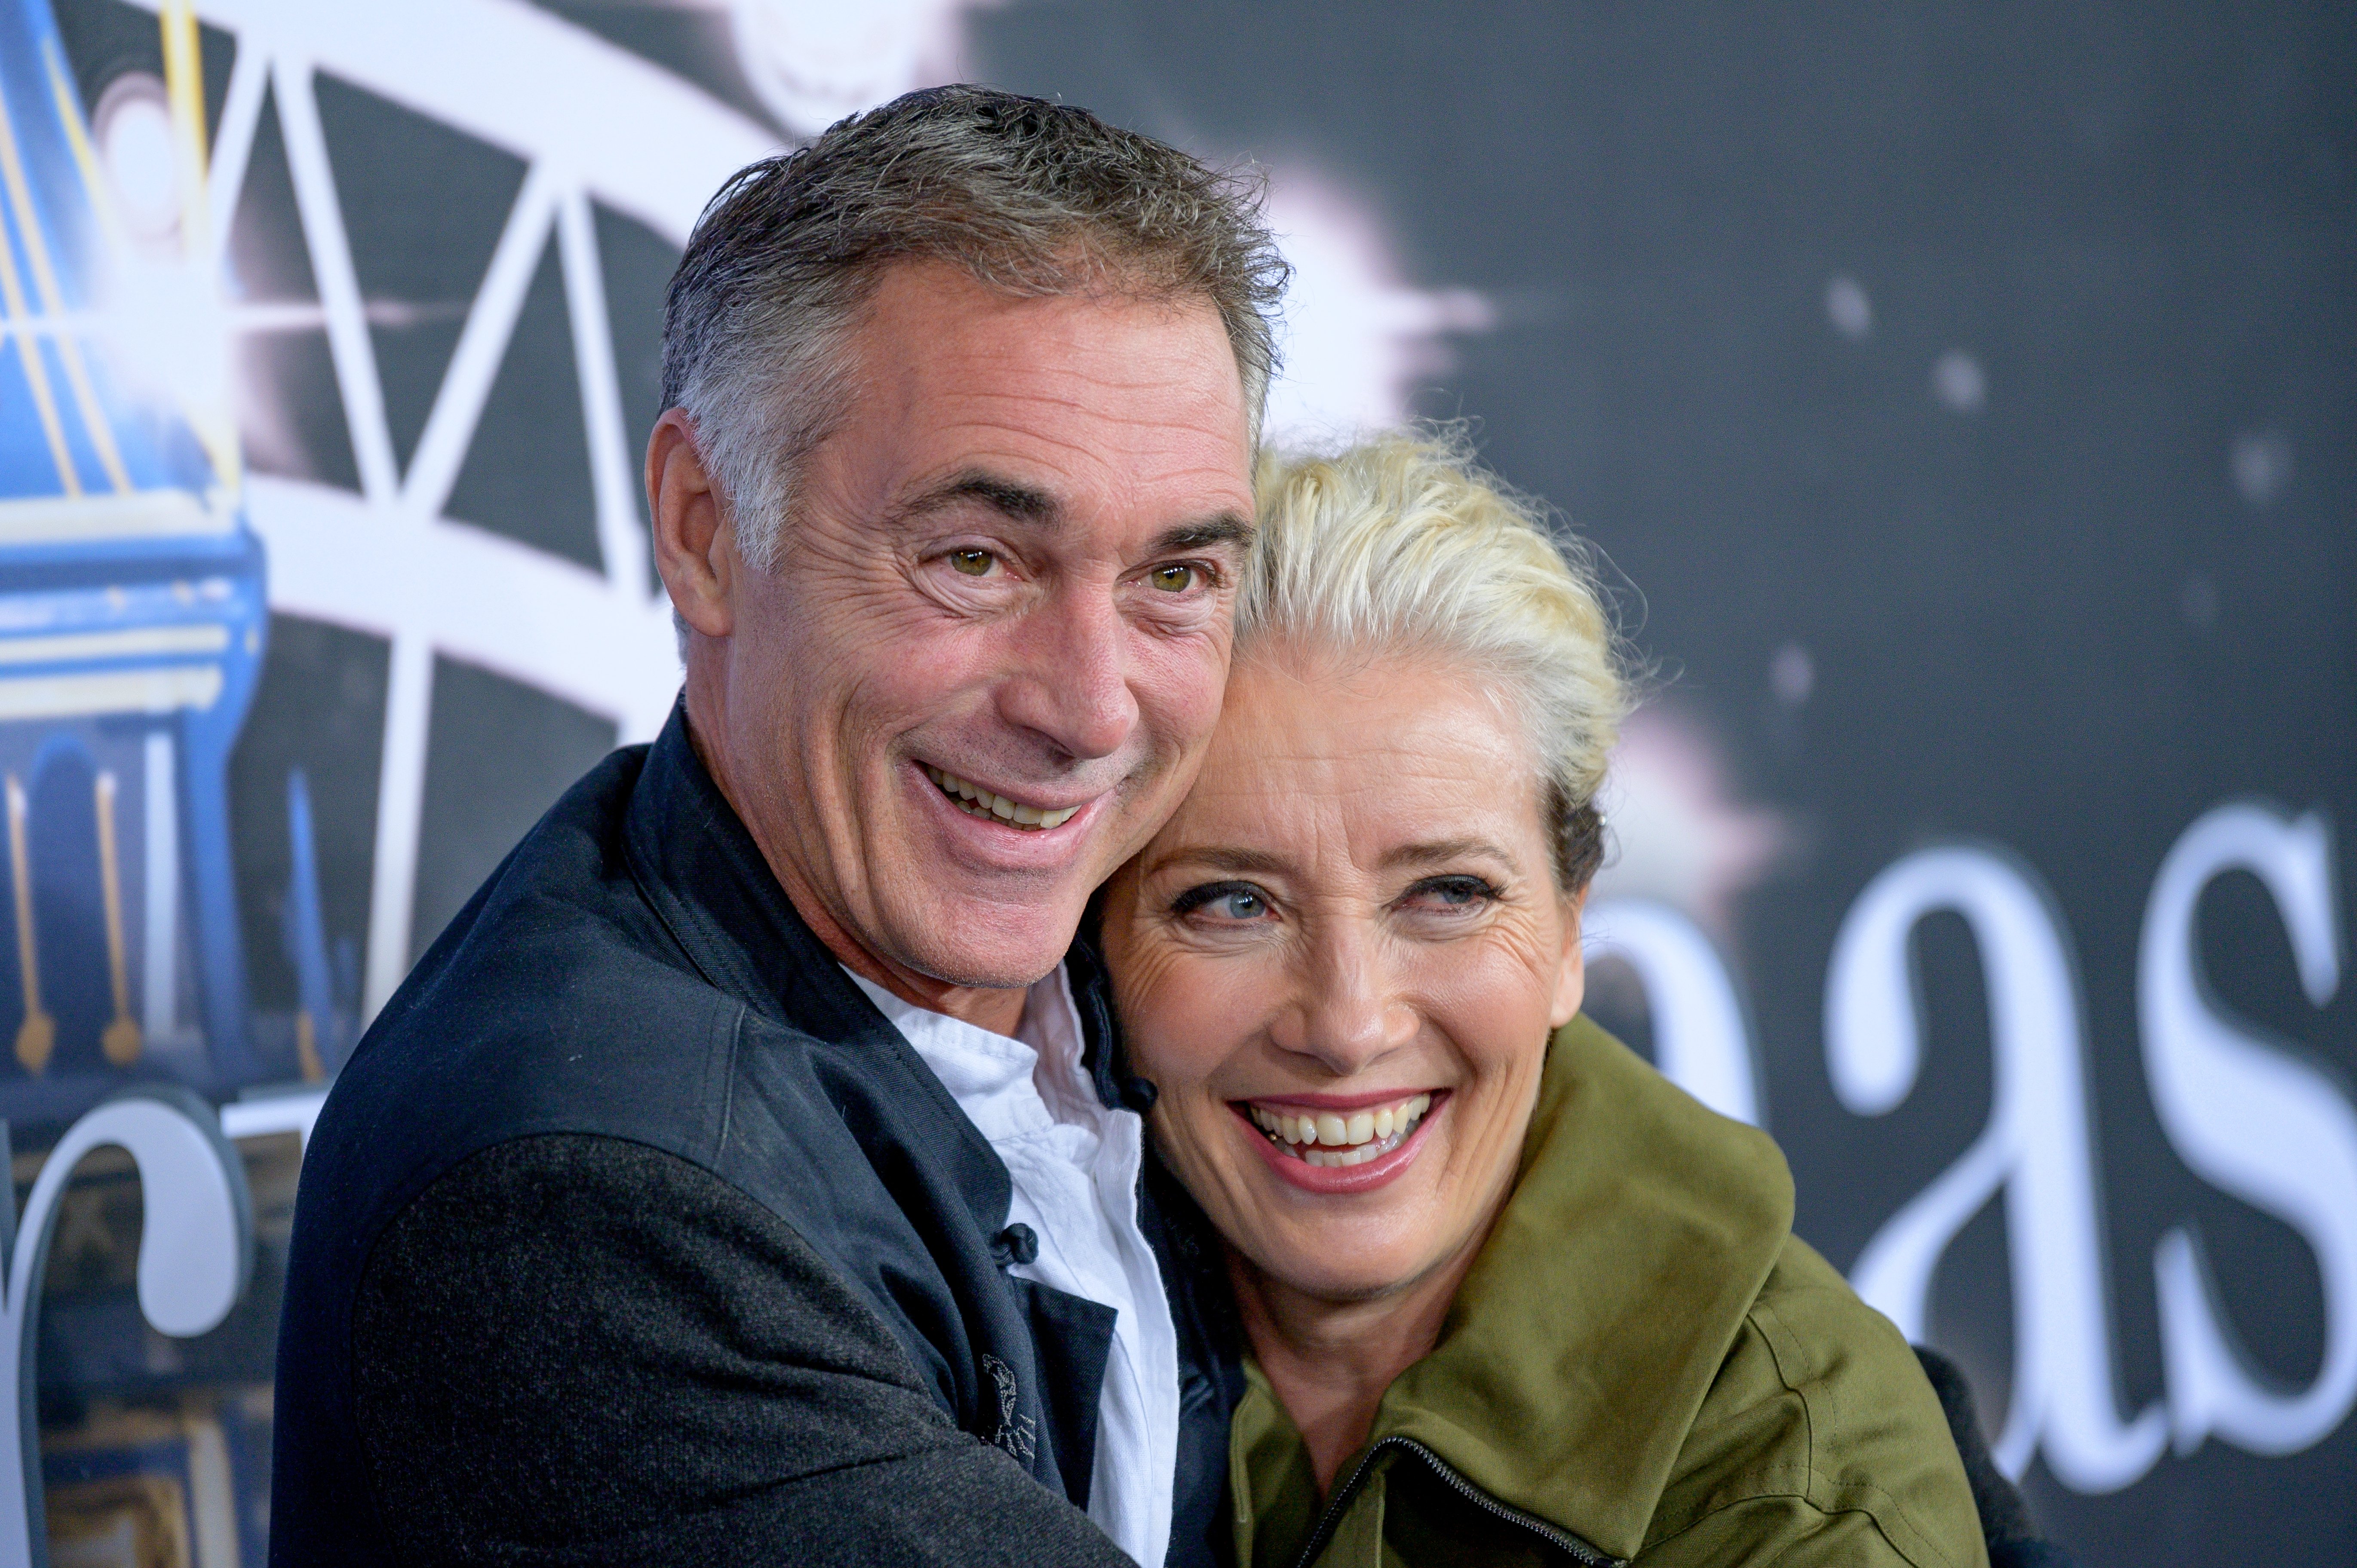 Greg Wise and Emma Thompson attend the "Last Christmas" New York Premiere at AMC Lincoln Square Theater on October 29, 2019, in New York City. | Source: Getty Images